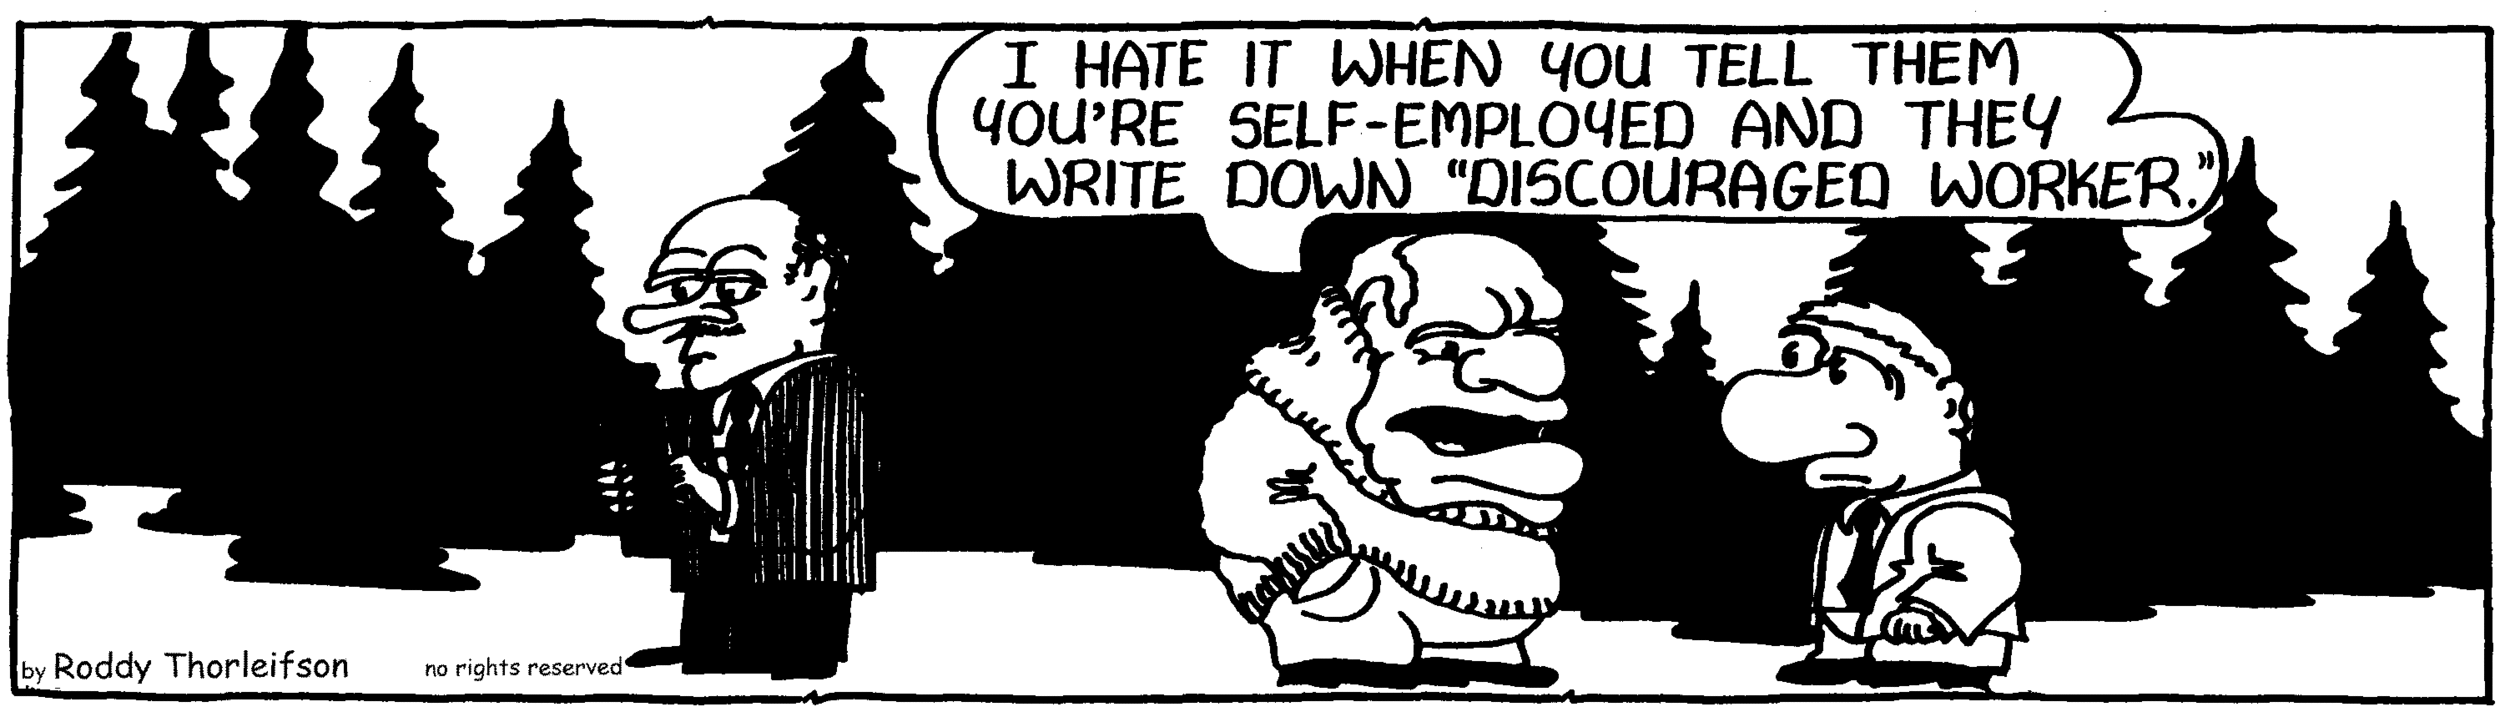 cartoon about polls, self-employment and discouraged workers